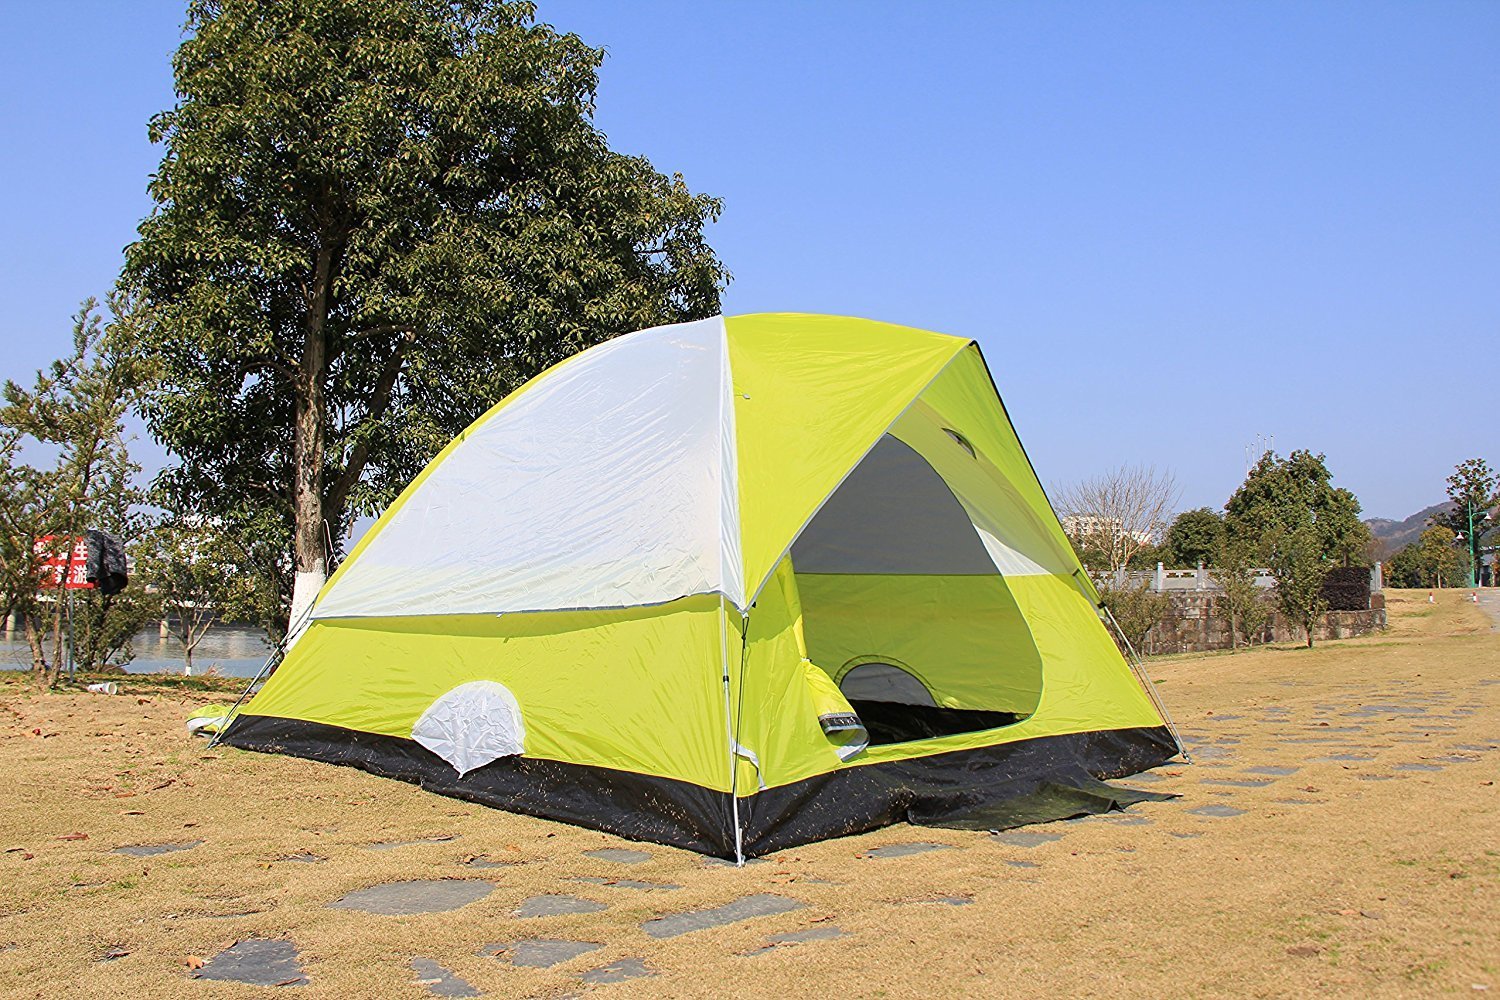 WHAT ARE DOUBLE PEAK STAR TENTS? KNOW THEIR FEATURES AND APPLICATIONS